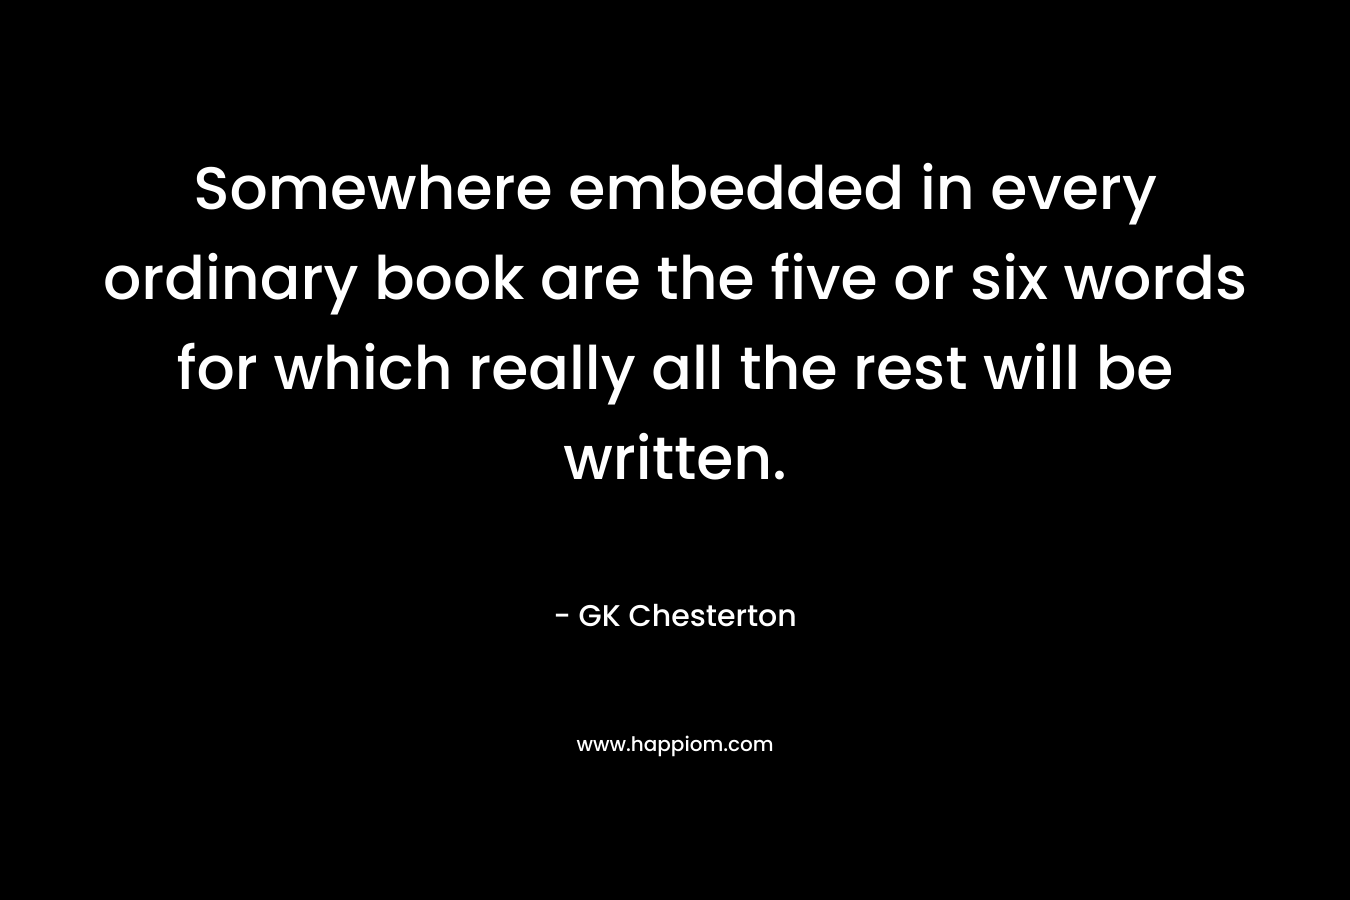 Somewhere embedded in every ordinary book are the five or six words for which really all the rest will be written. – GK Chesterton